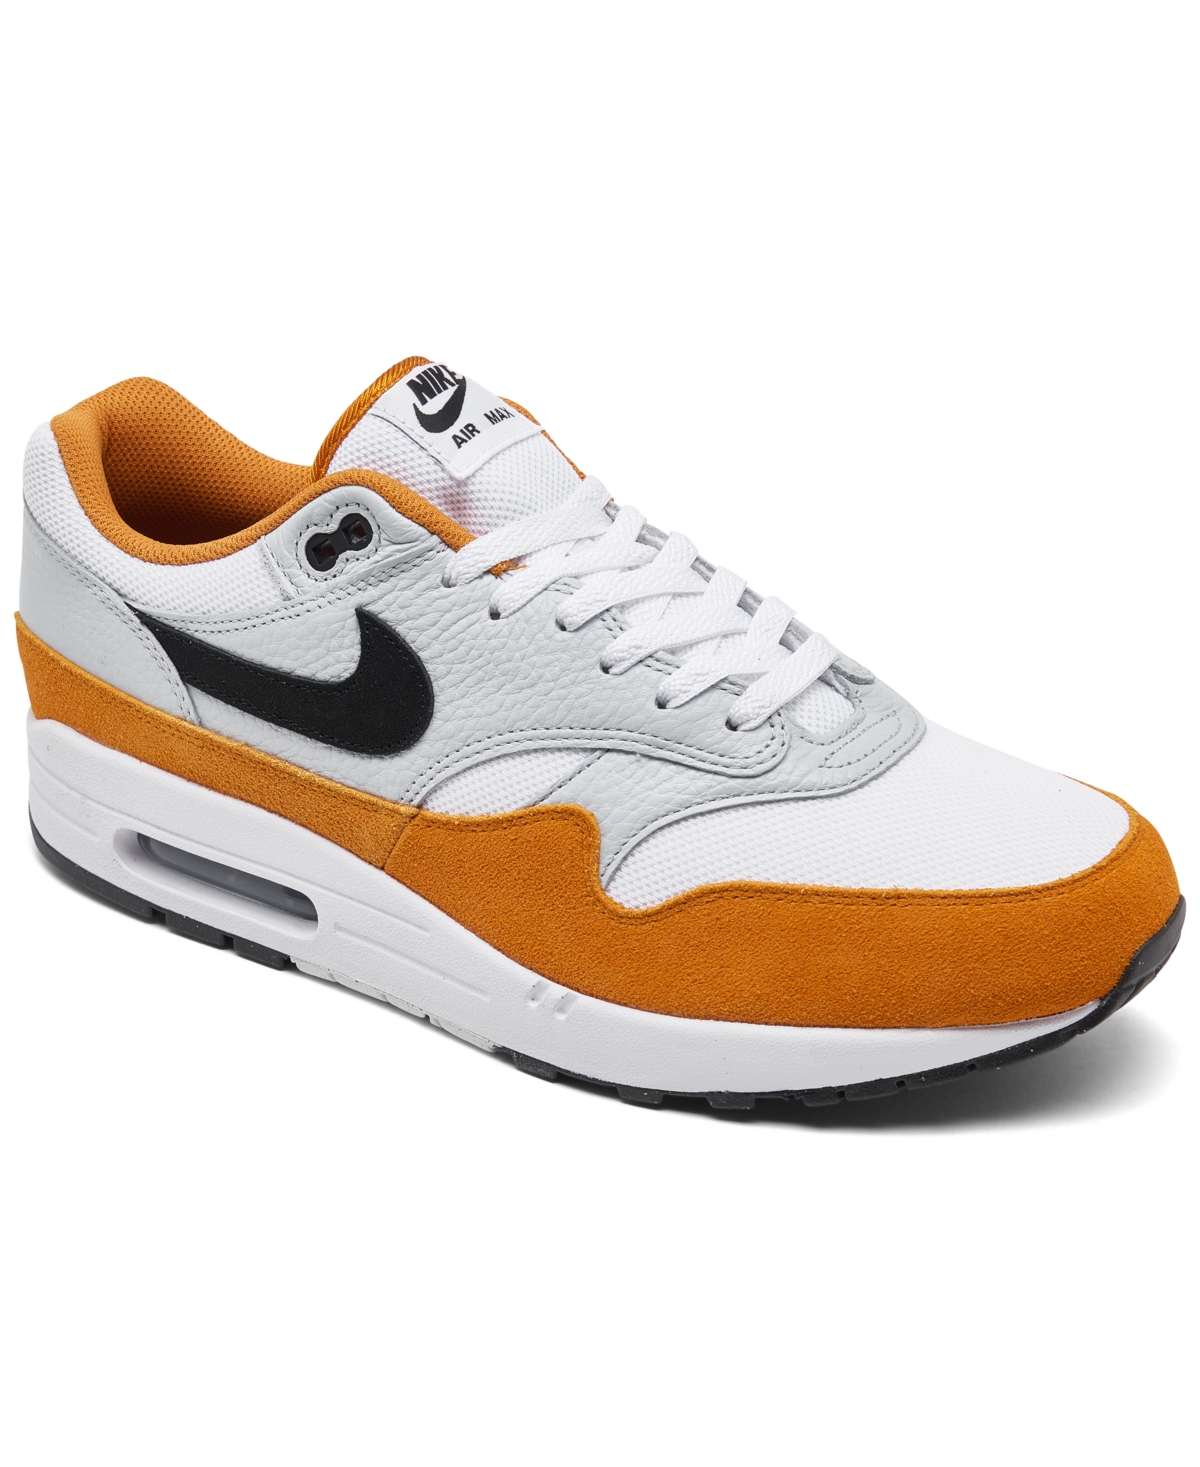 Men's Air Max 1 Casual Sneakers from Finish Line - White/Monarch